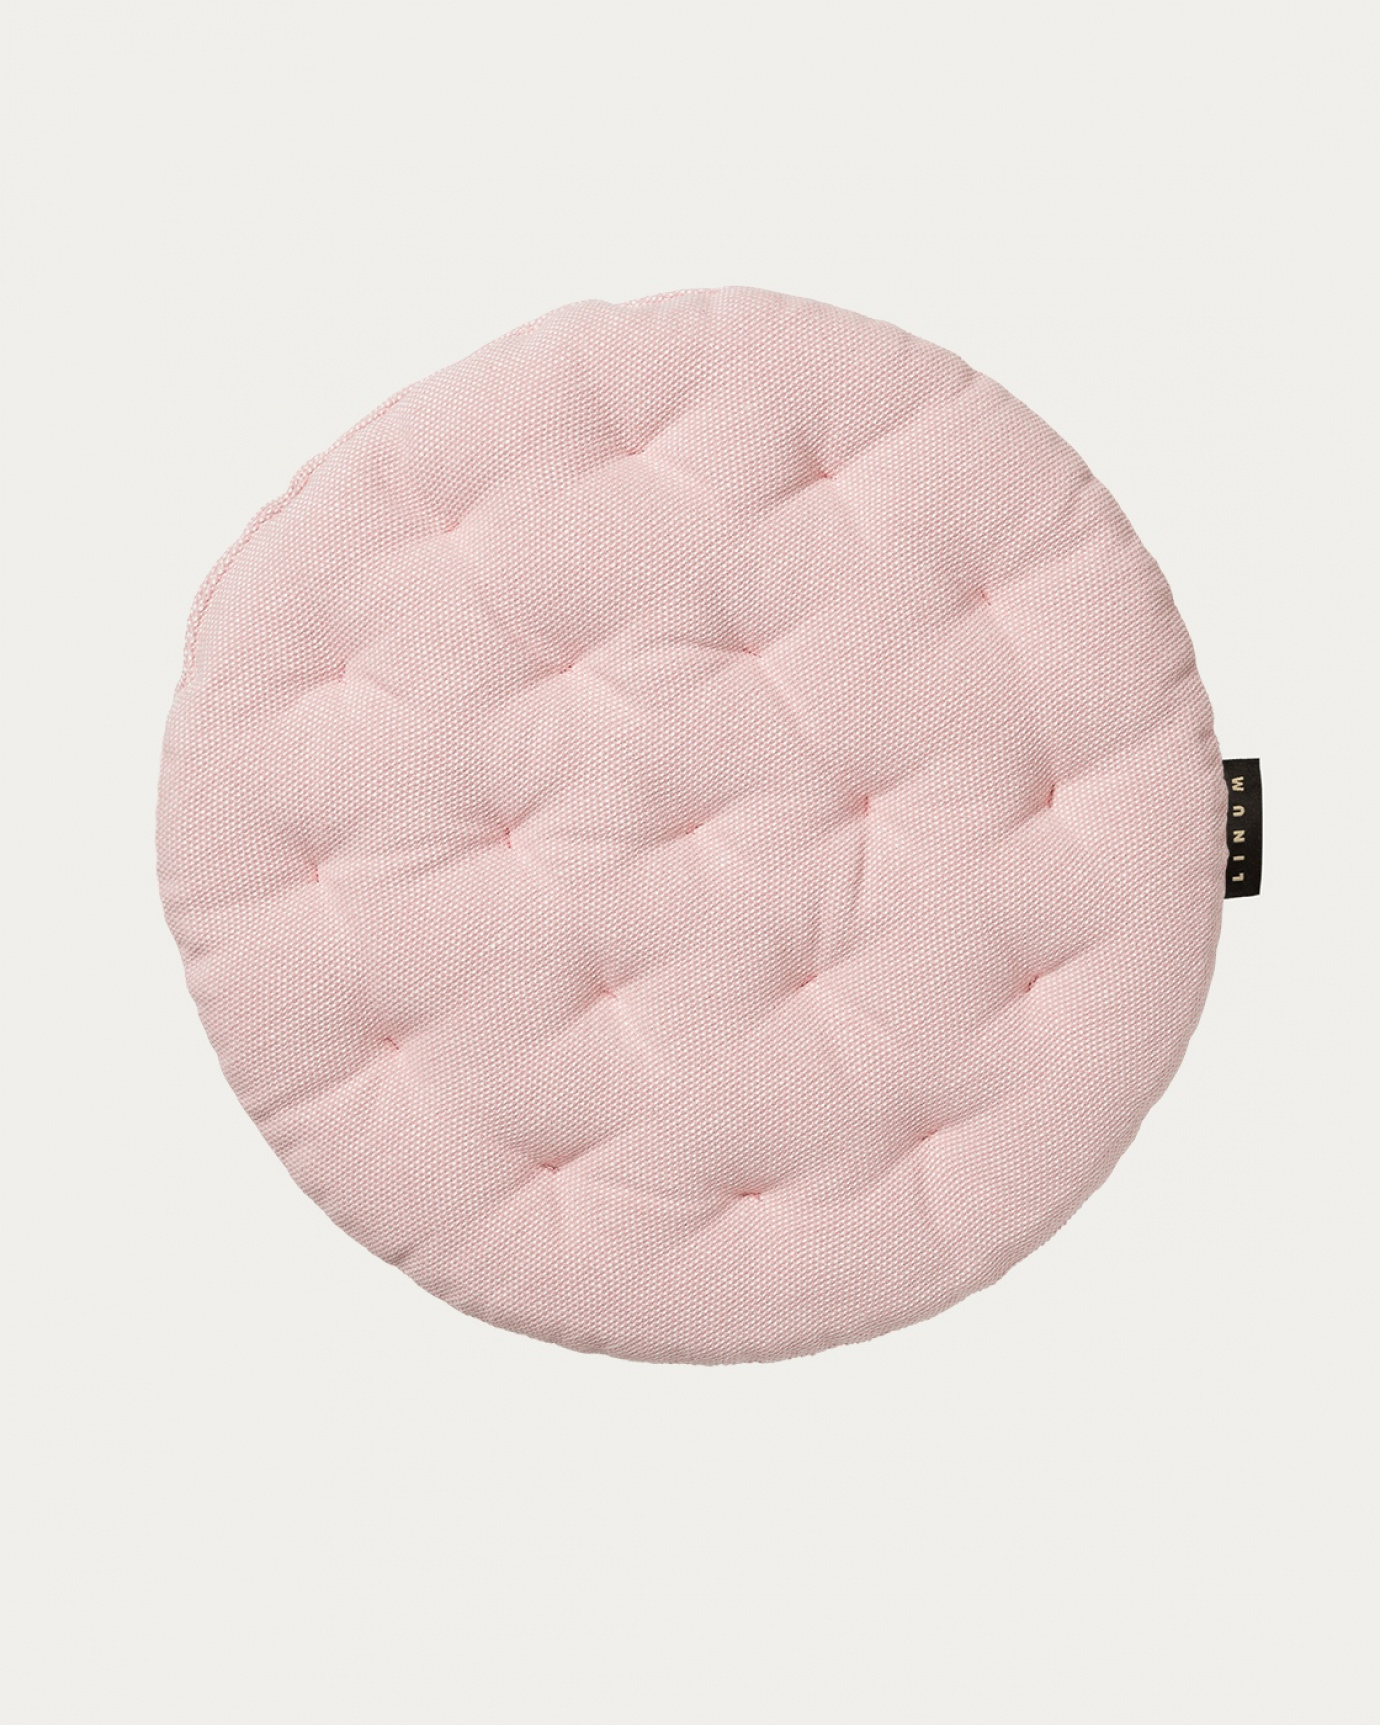 Product image dusty pink PEPPER seat cushion made of soft cotton with recycled polyester filling from LINUM DESIGN. Size ø37 cm.